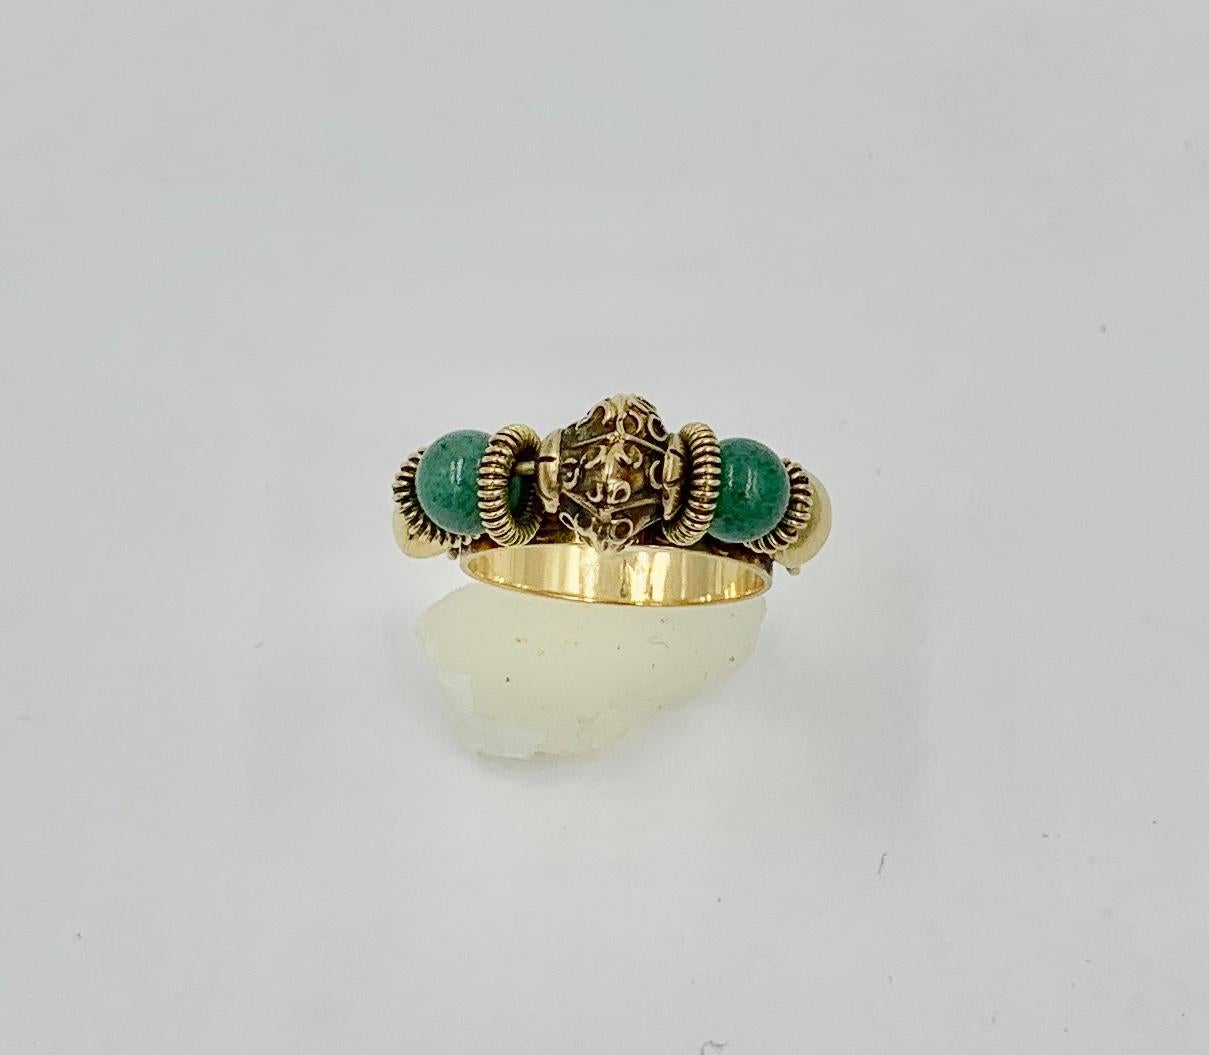 A wonderful Mid-Century Modern Jadeite Jade Ring with stunning 18 Karat Gold and Jade Beads which spin along the top of the ring in 18 Karat Yellow Gold.  The ring is just wonderful and in a Moghul style.  The Jade beads are interspersed with 18